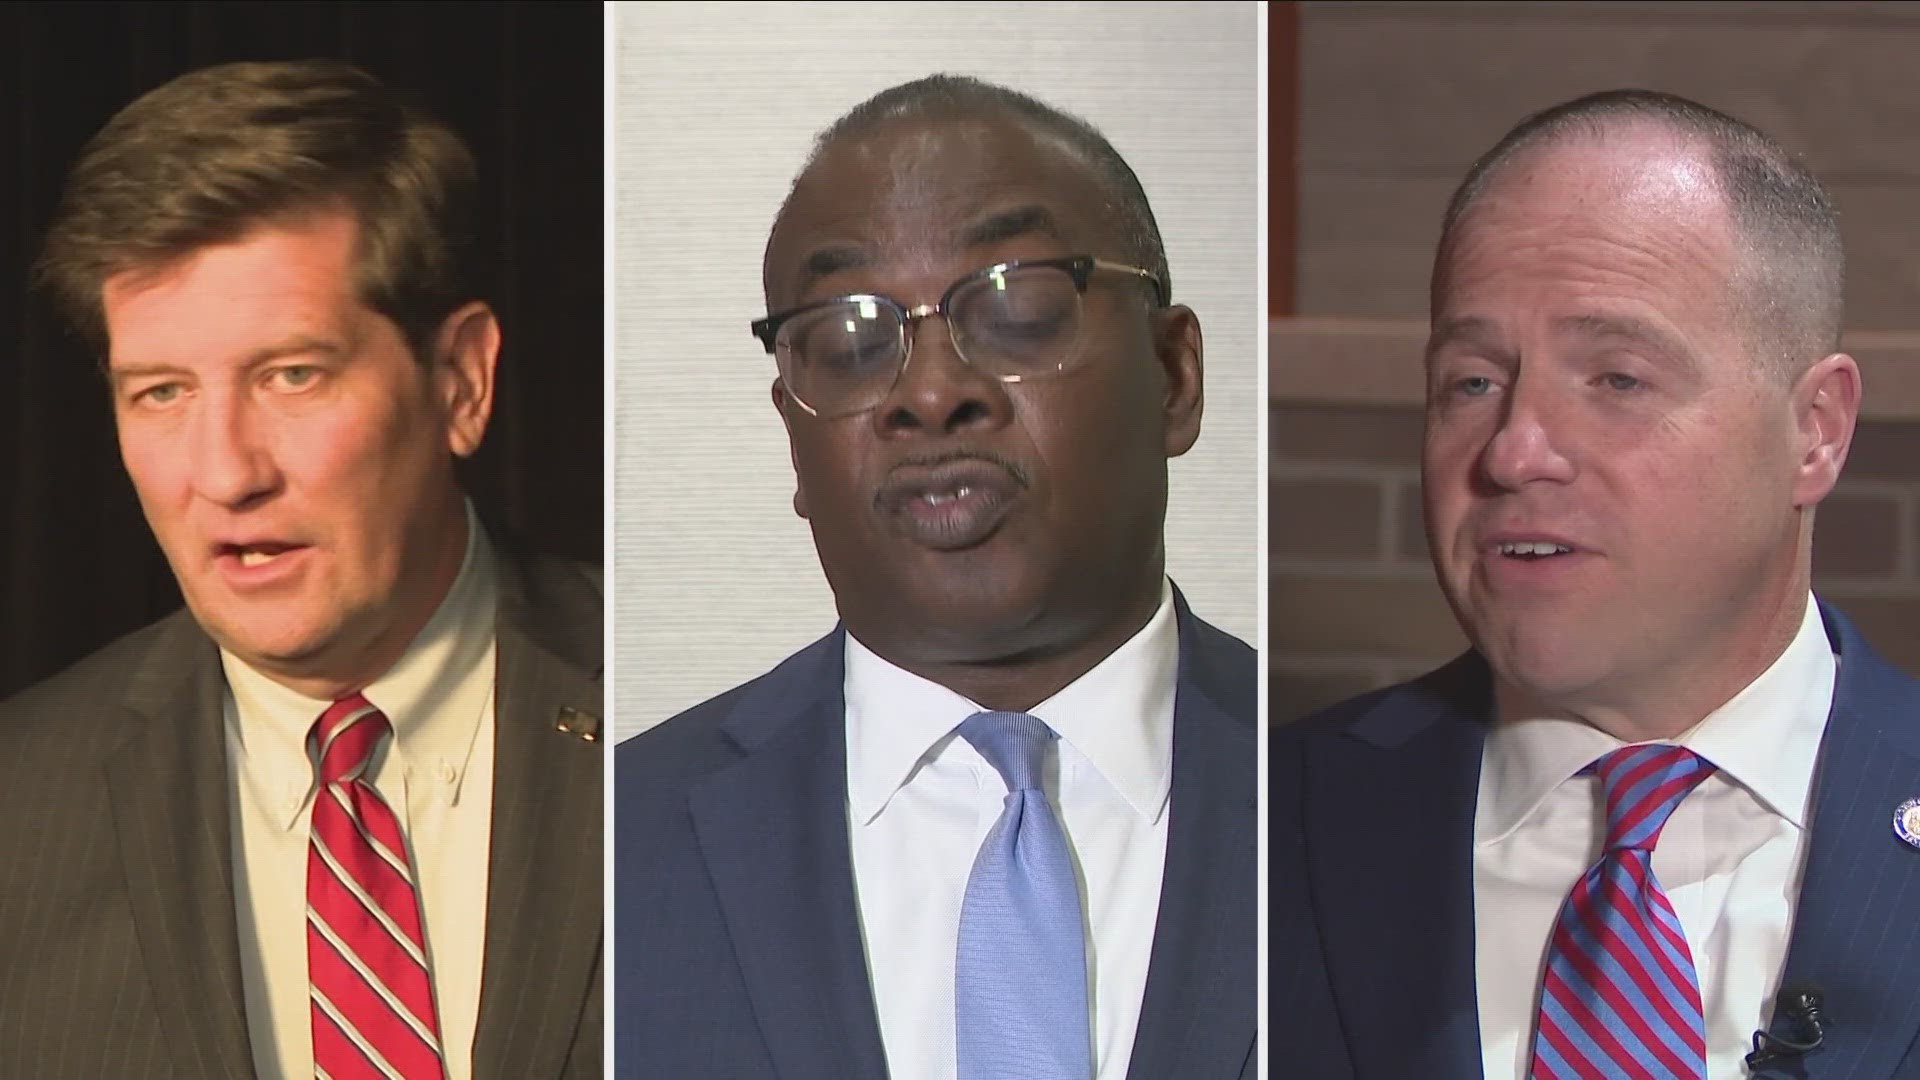 While Erie County Executive Mark Poloncarz is out of the race, State Senator Tim Kennedy and Buffalo Mayor Byron Brown are expected to battle for the nomination.